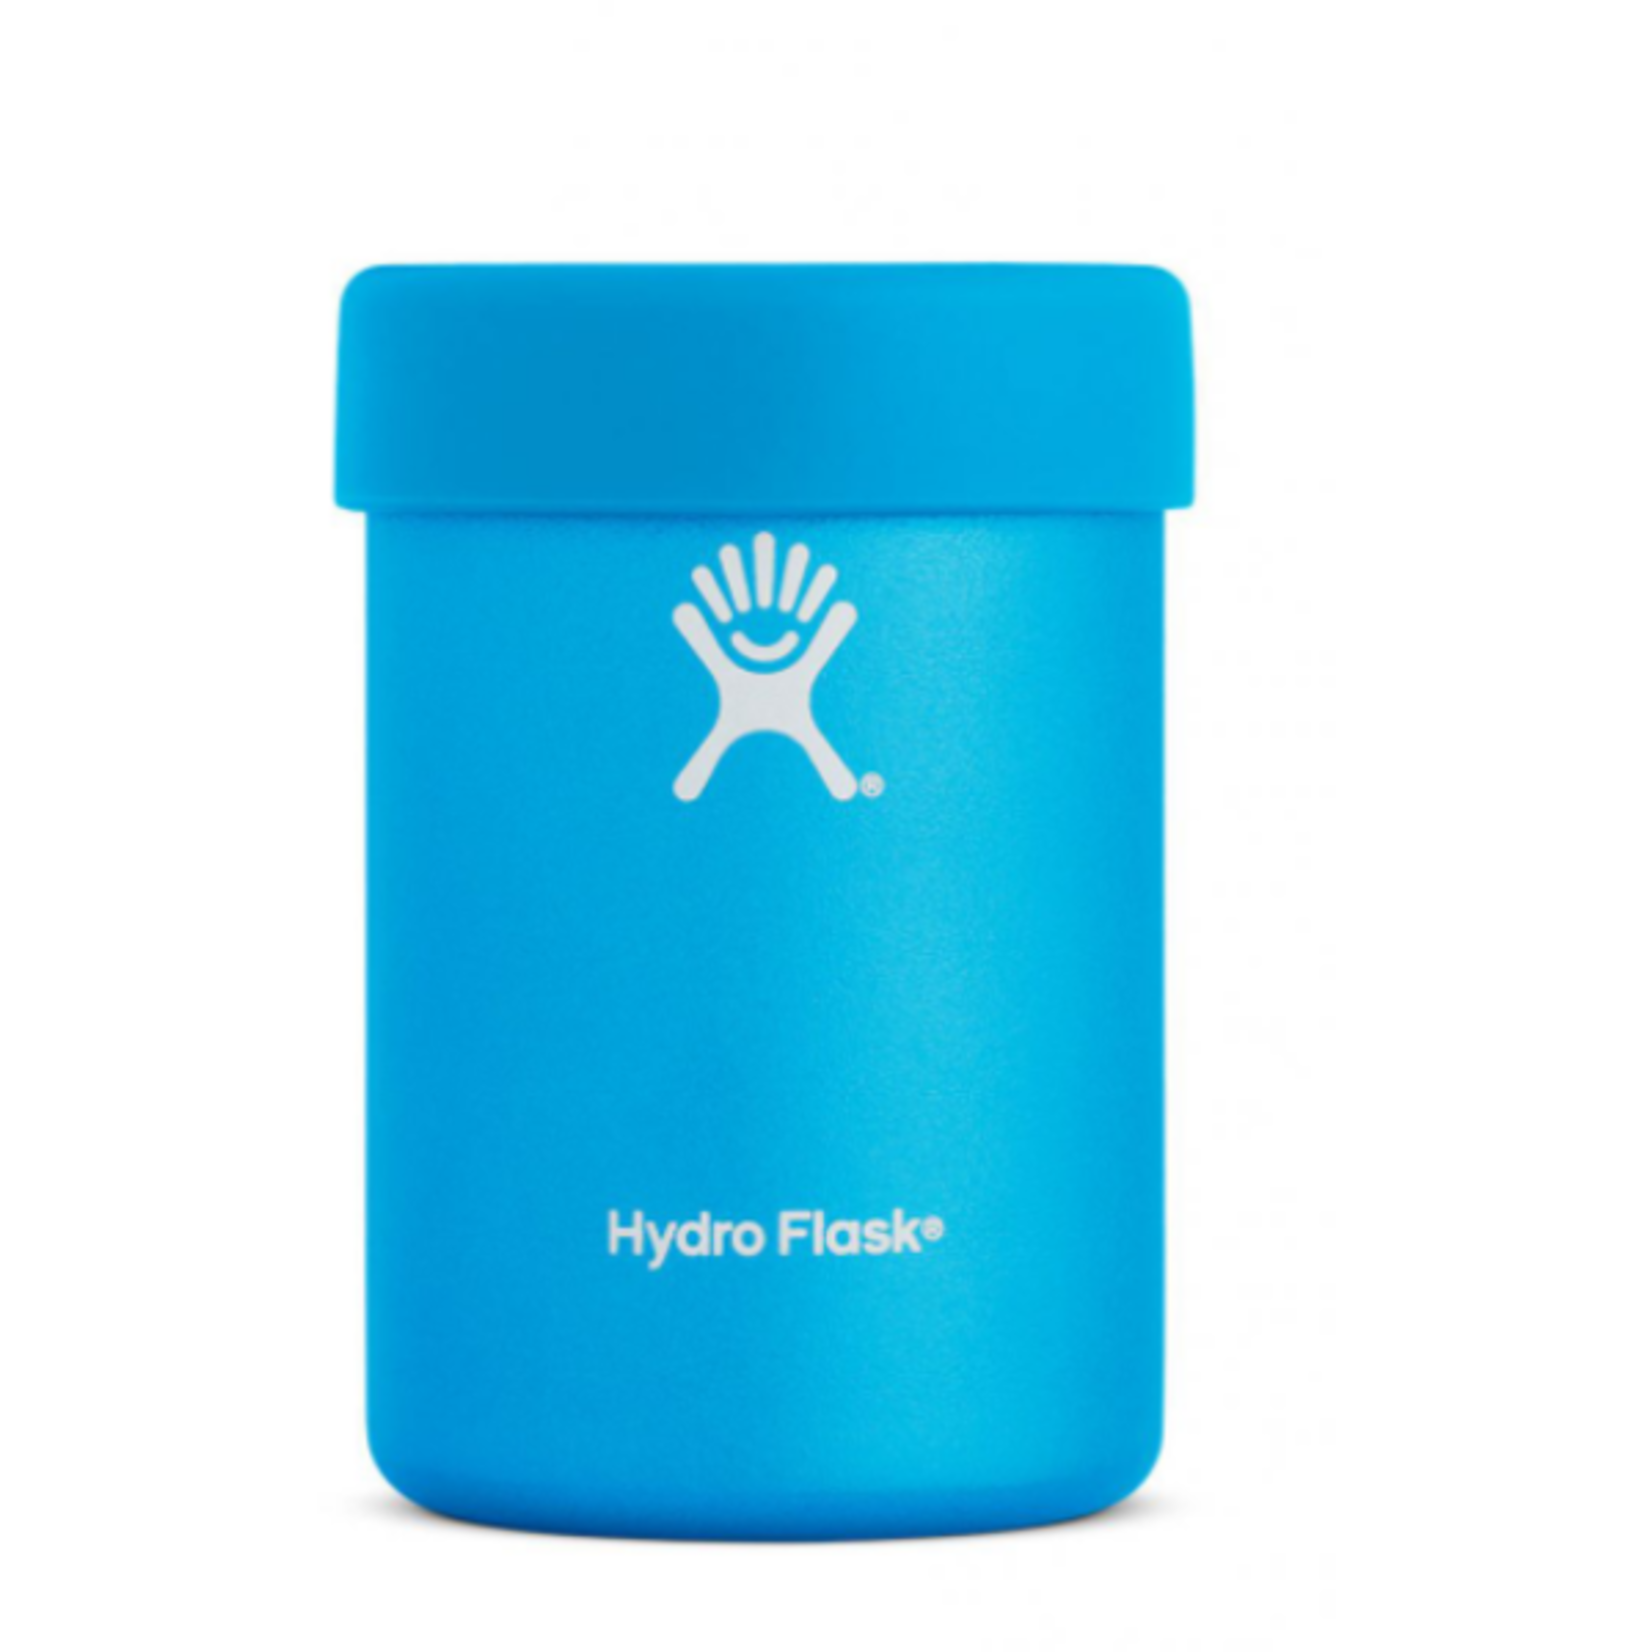 HYDROFLASK Hydro Flask 12 OZ Cooler Cup